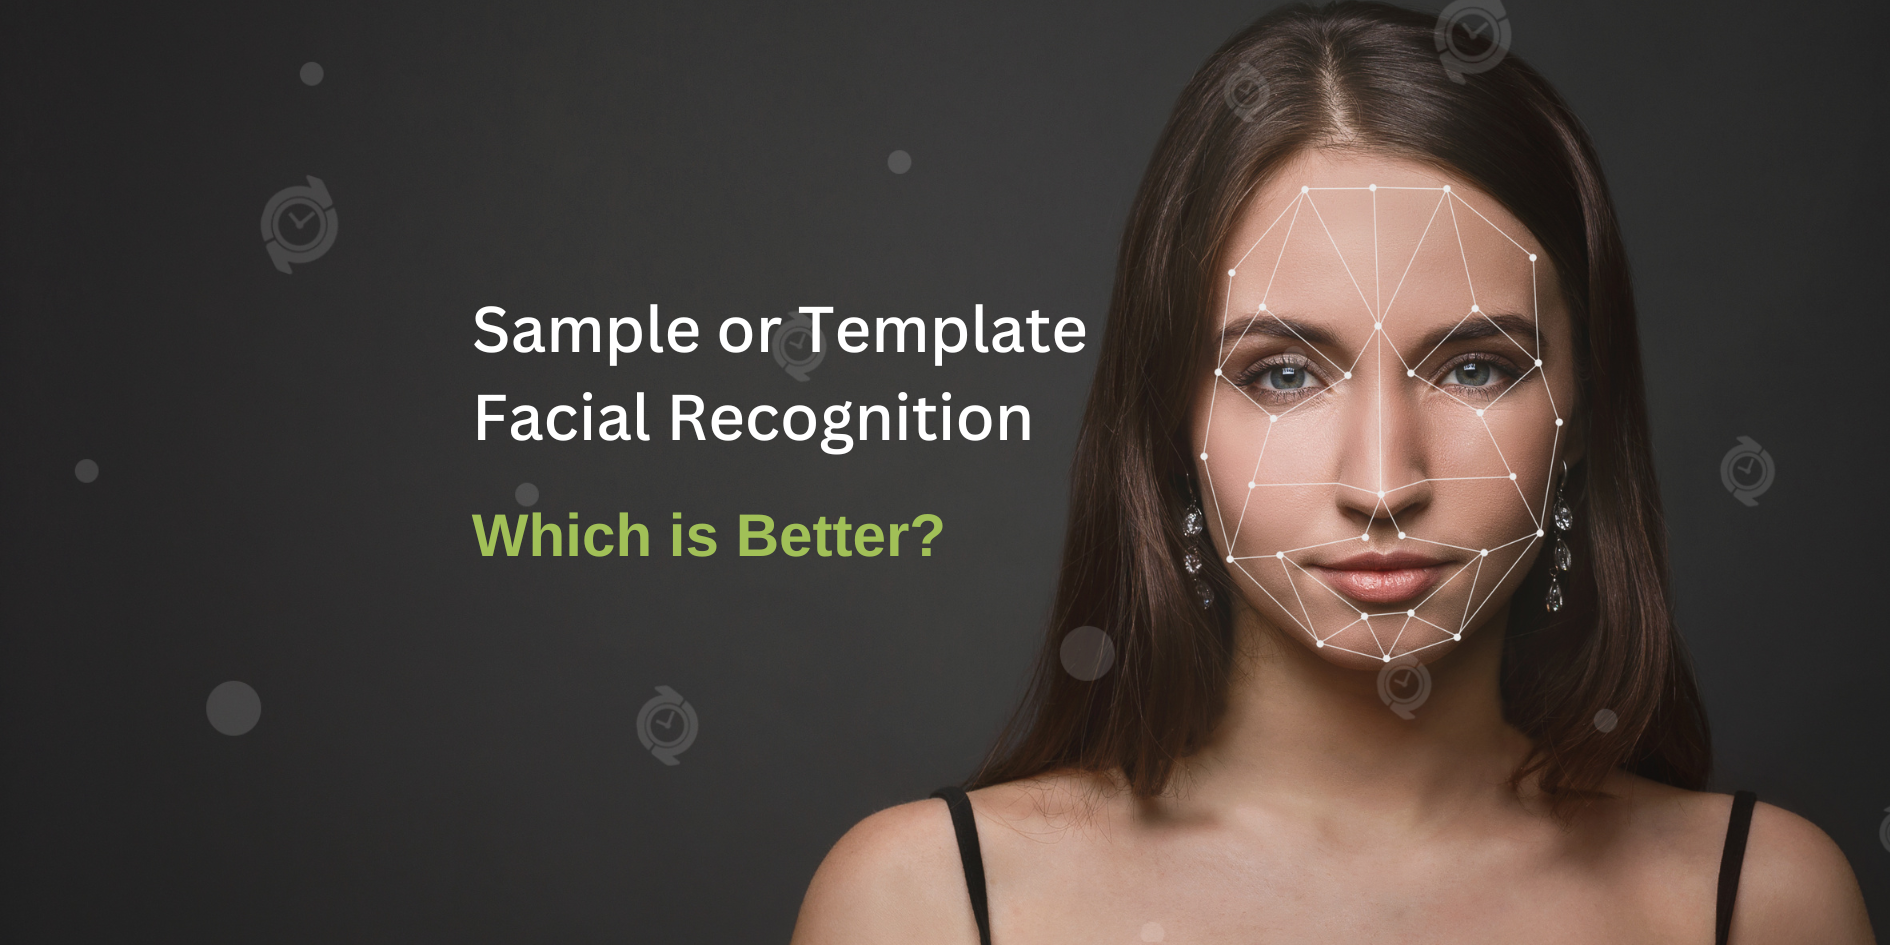 BundyPlus | Which is Better - Sample or Template Facial Recognition